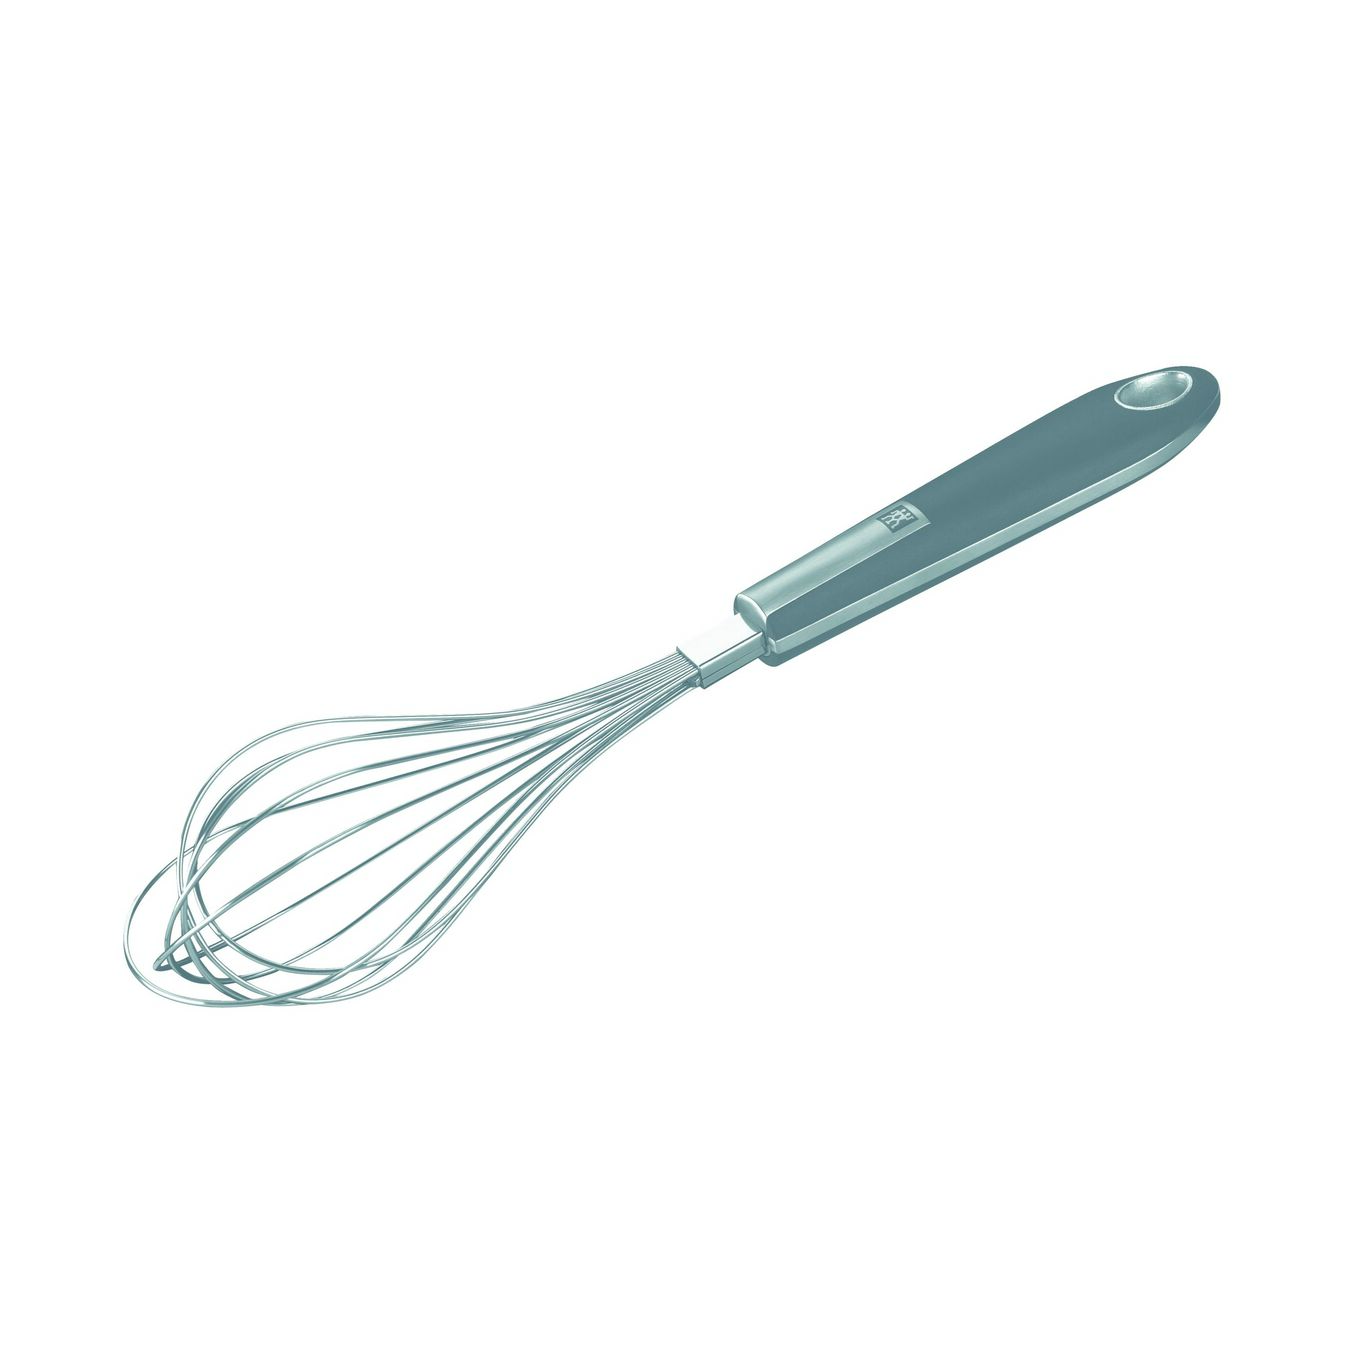 Whisk, 31 cm, 18/10 Stainless Steel,,large 1